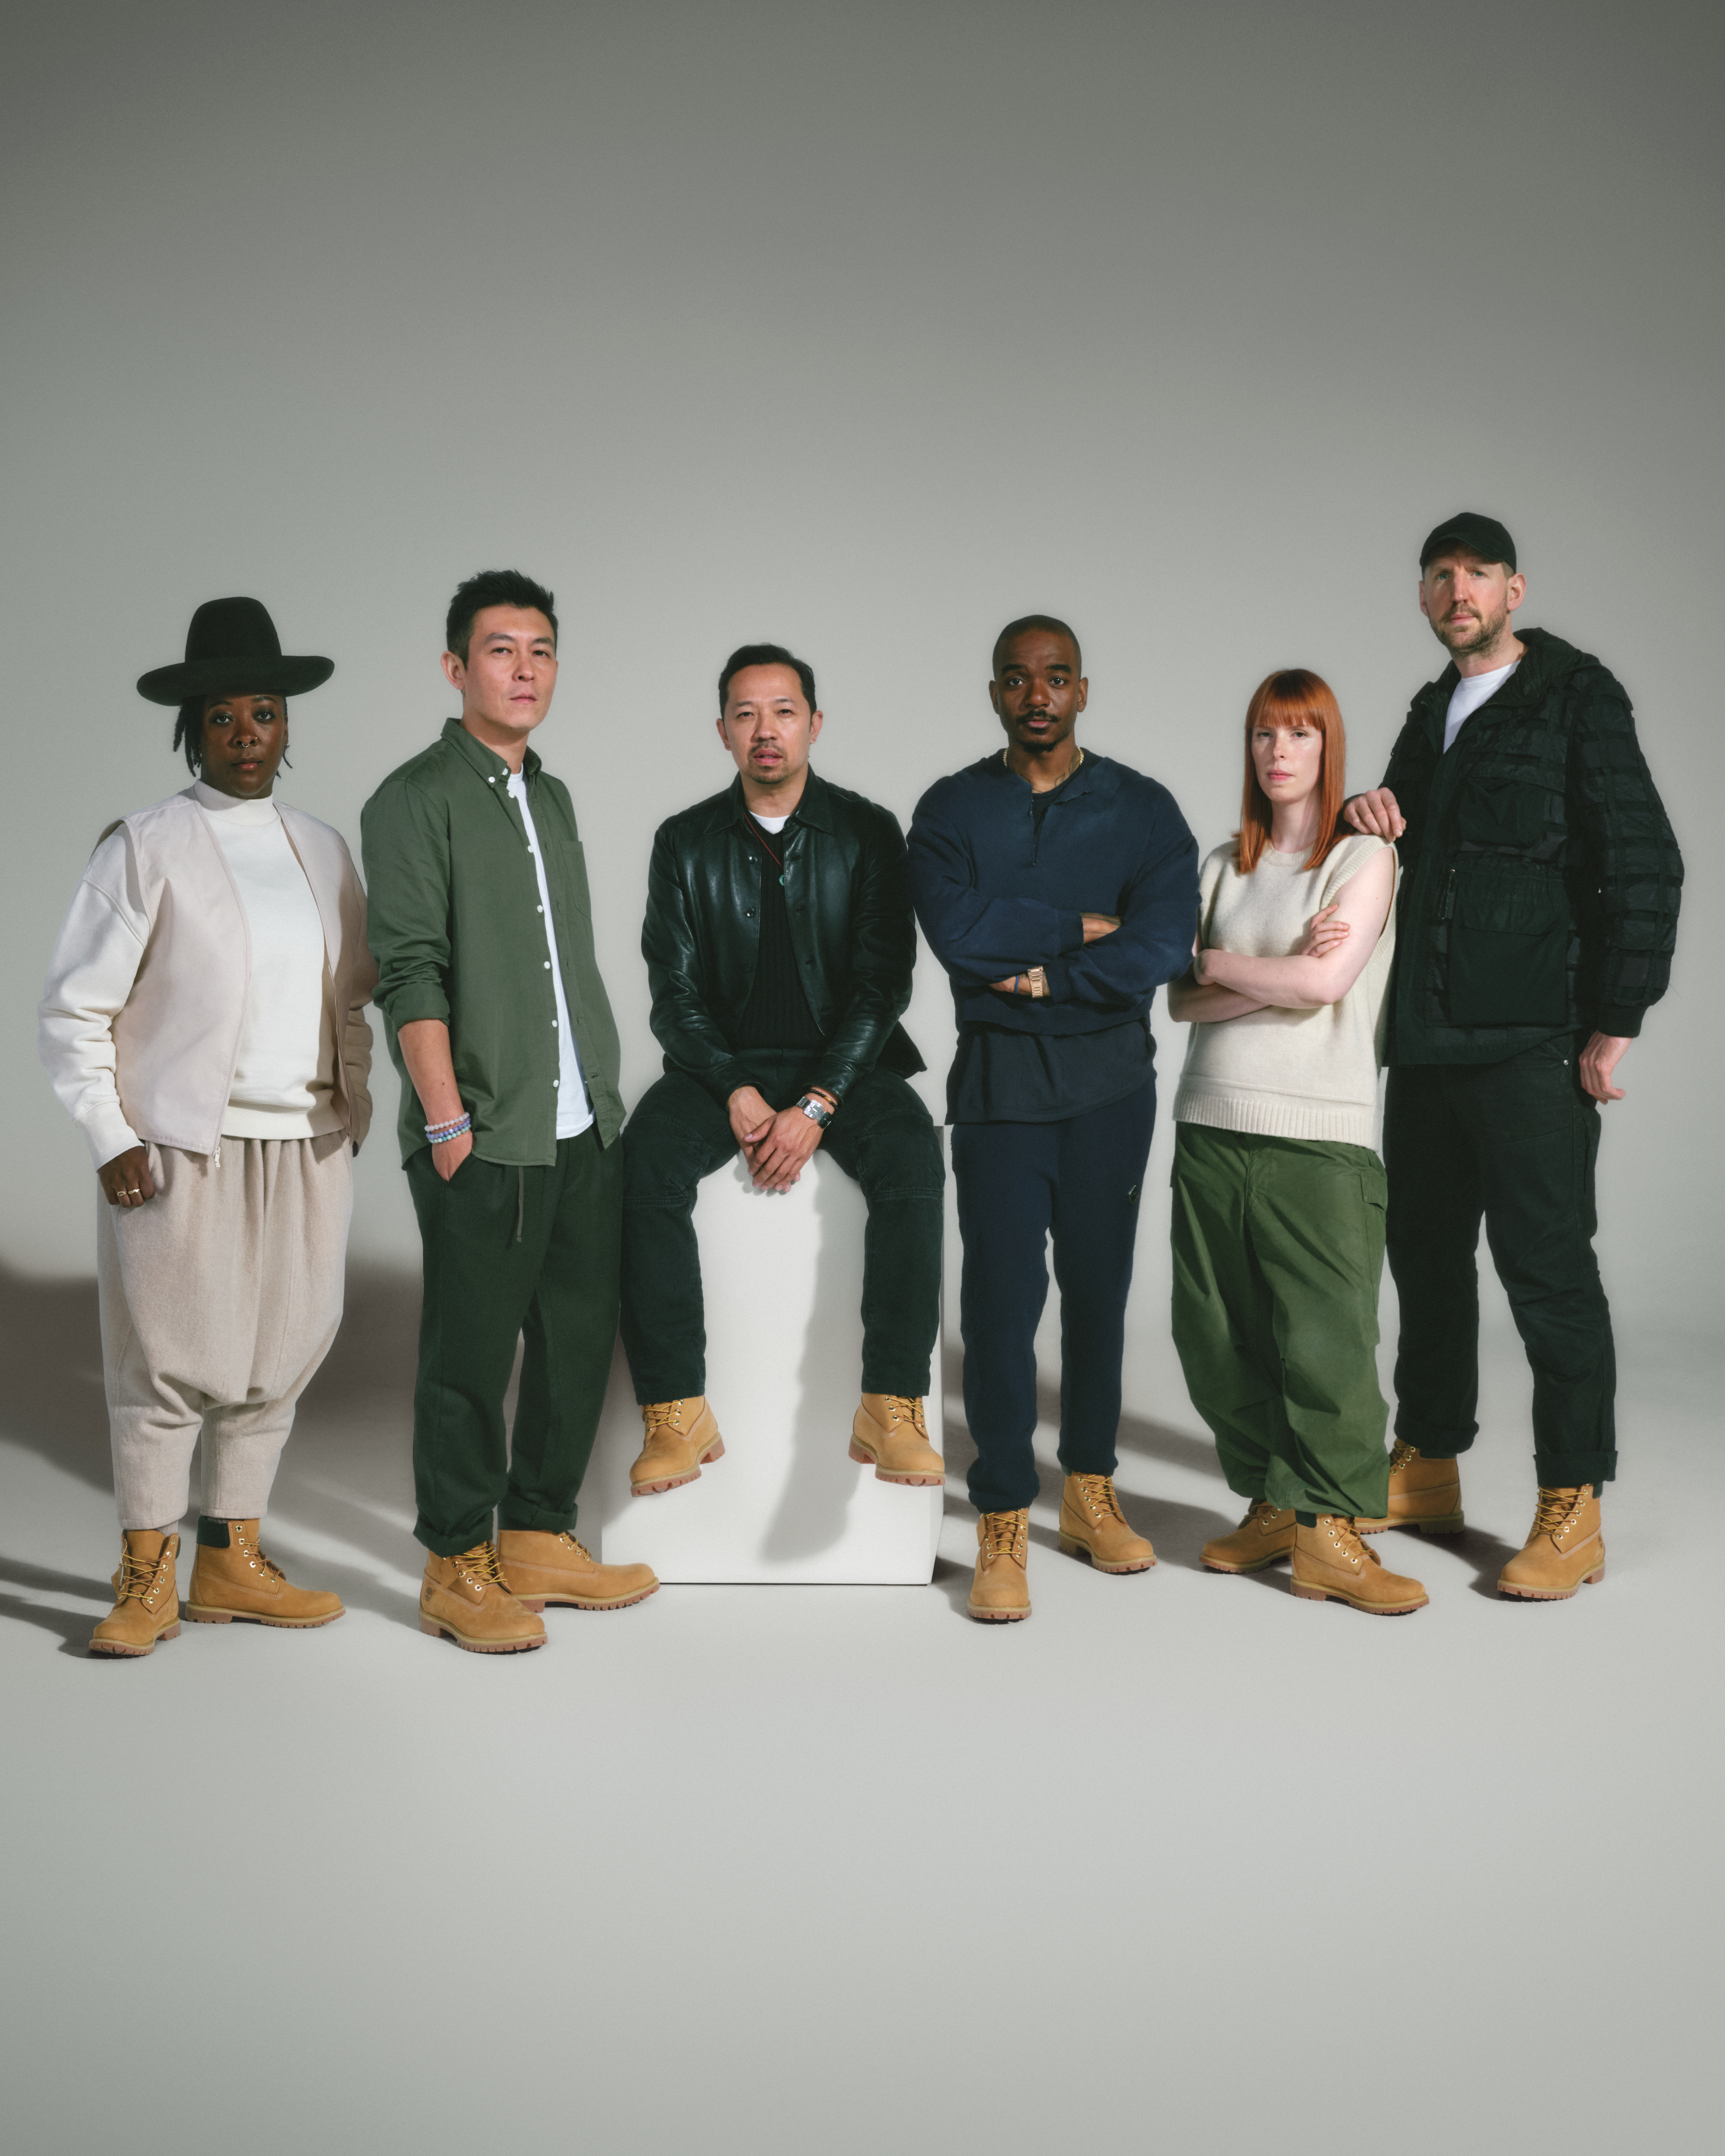 Timberland of Timberland® With the of Original Five Marks Launch | Boot Decades Business Wire Future73